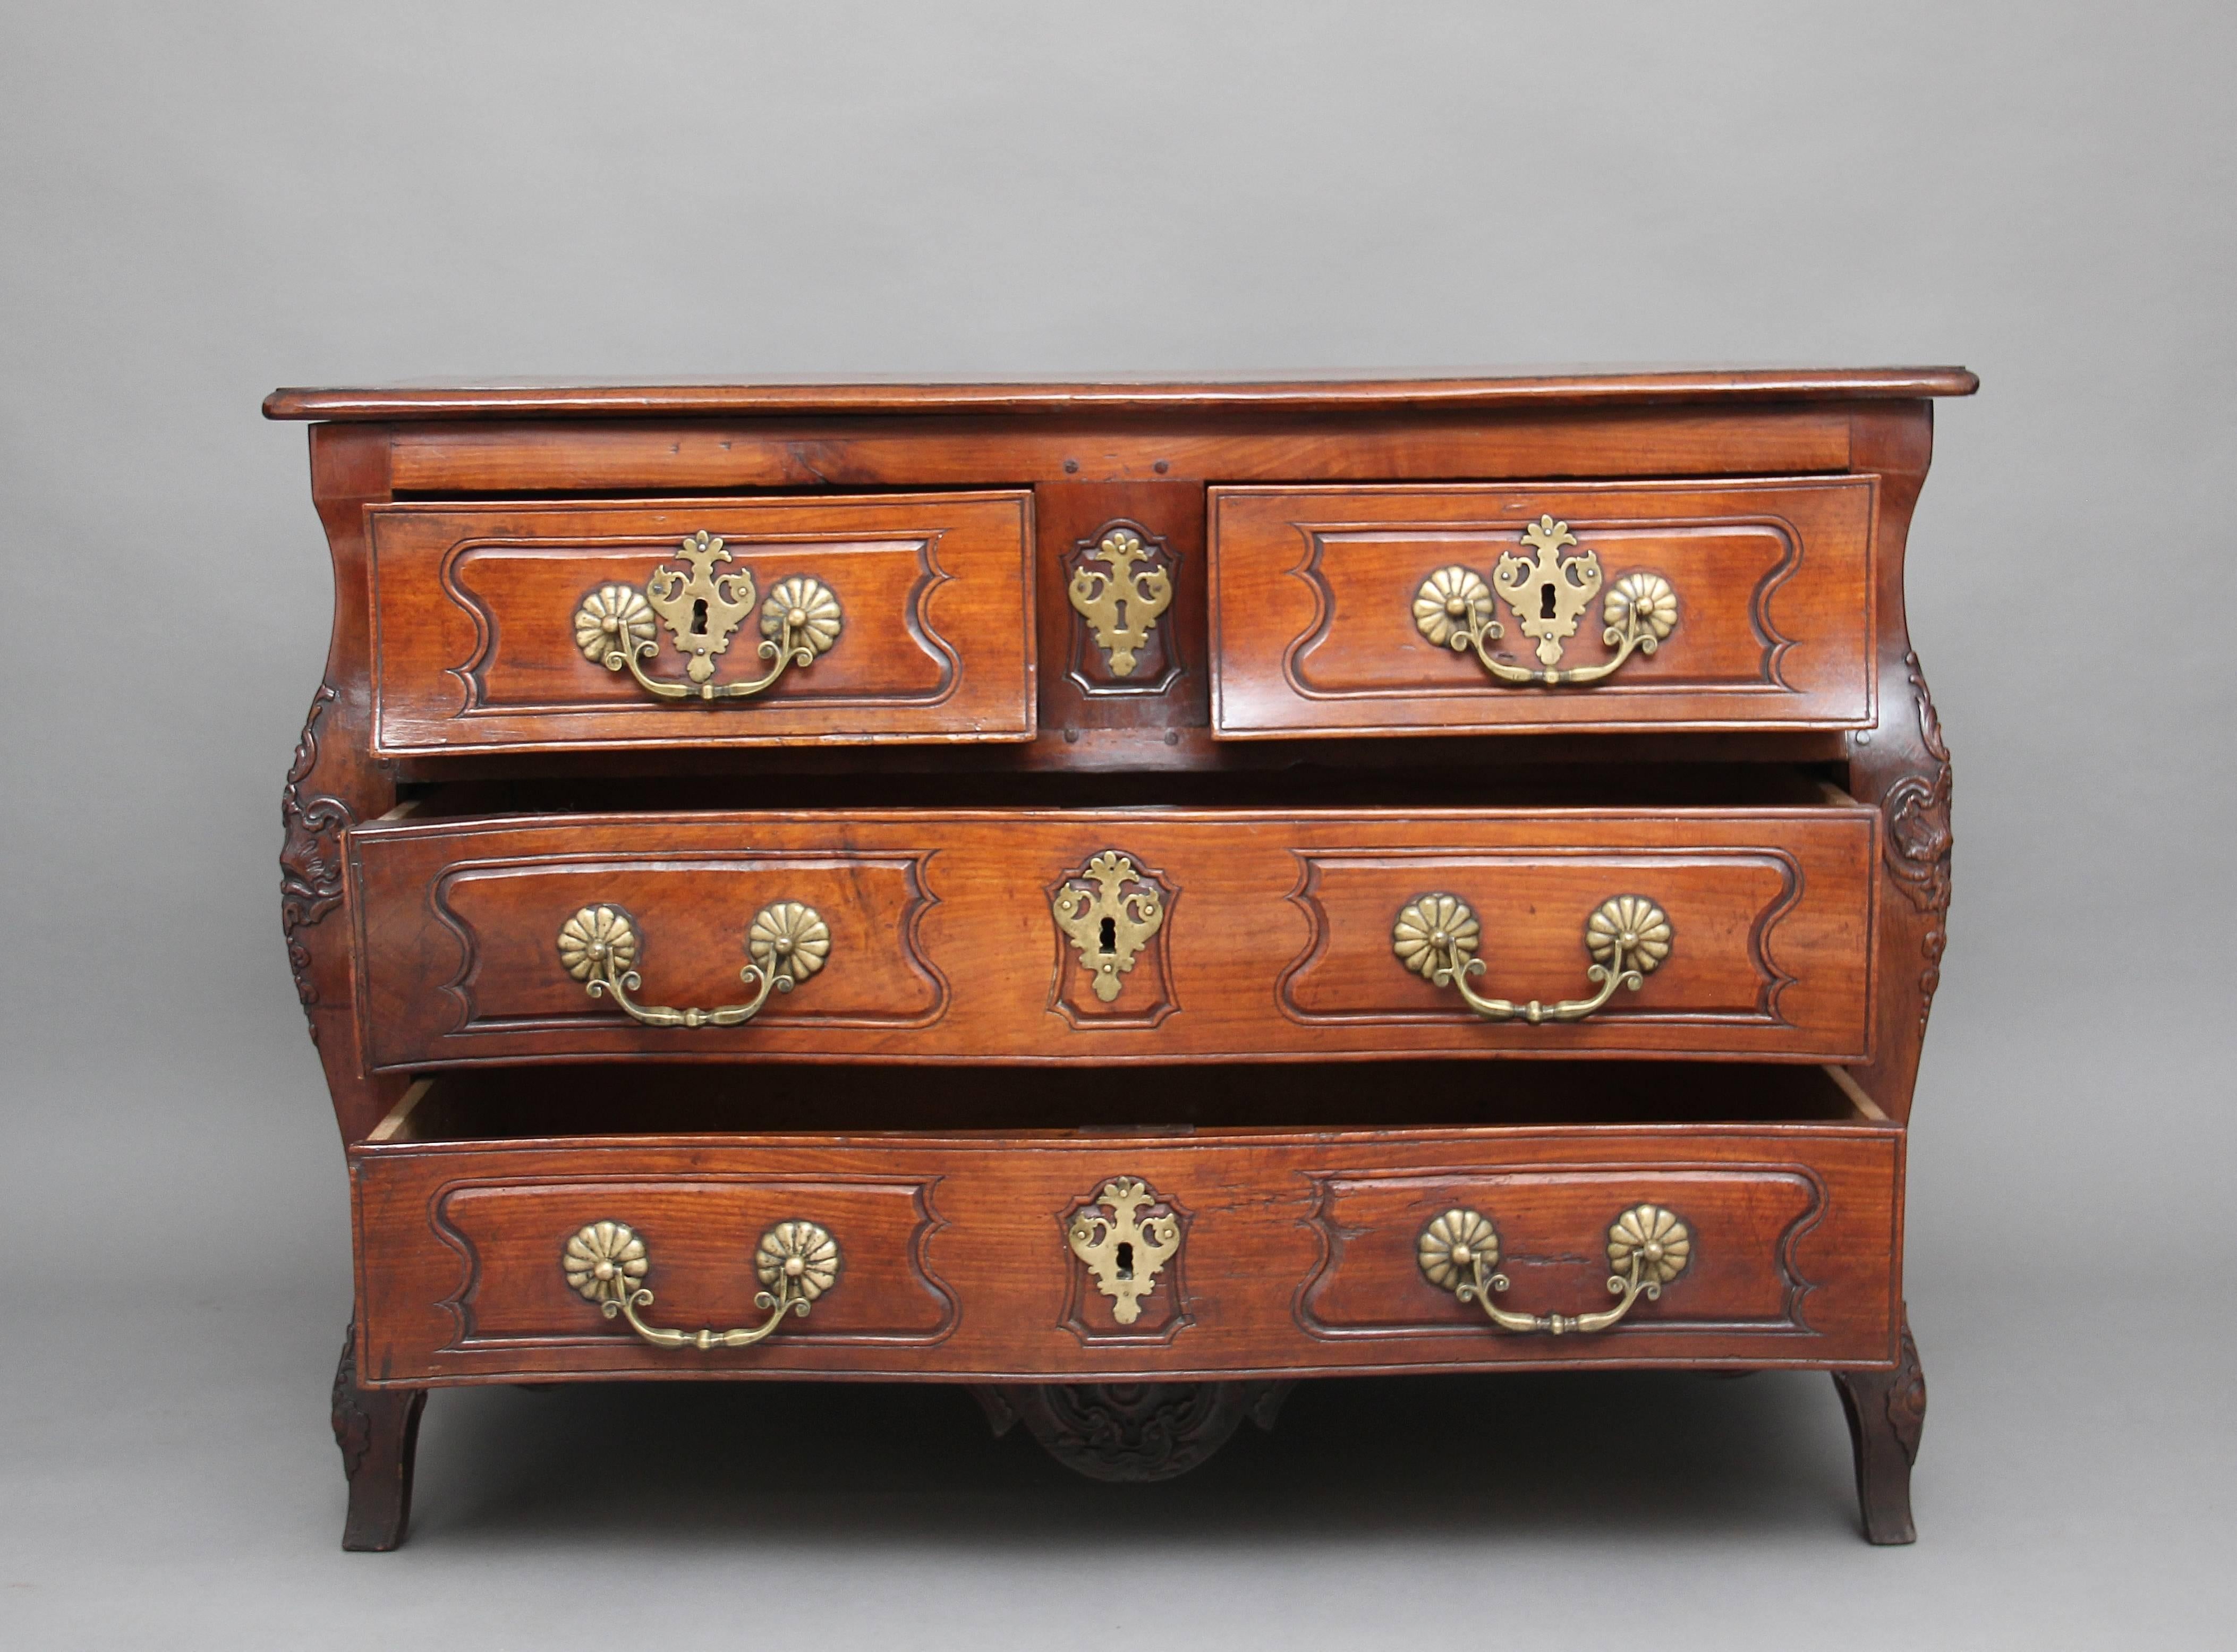 A superb quality 18th Century cherrywood commode of serpentine bombe form, with two small over two long drawers with original brass handles and escutcheons, original steel locks, with two shaped panel ends and carved decoration on the front, a